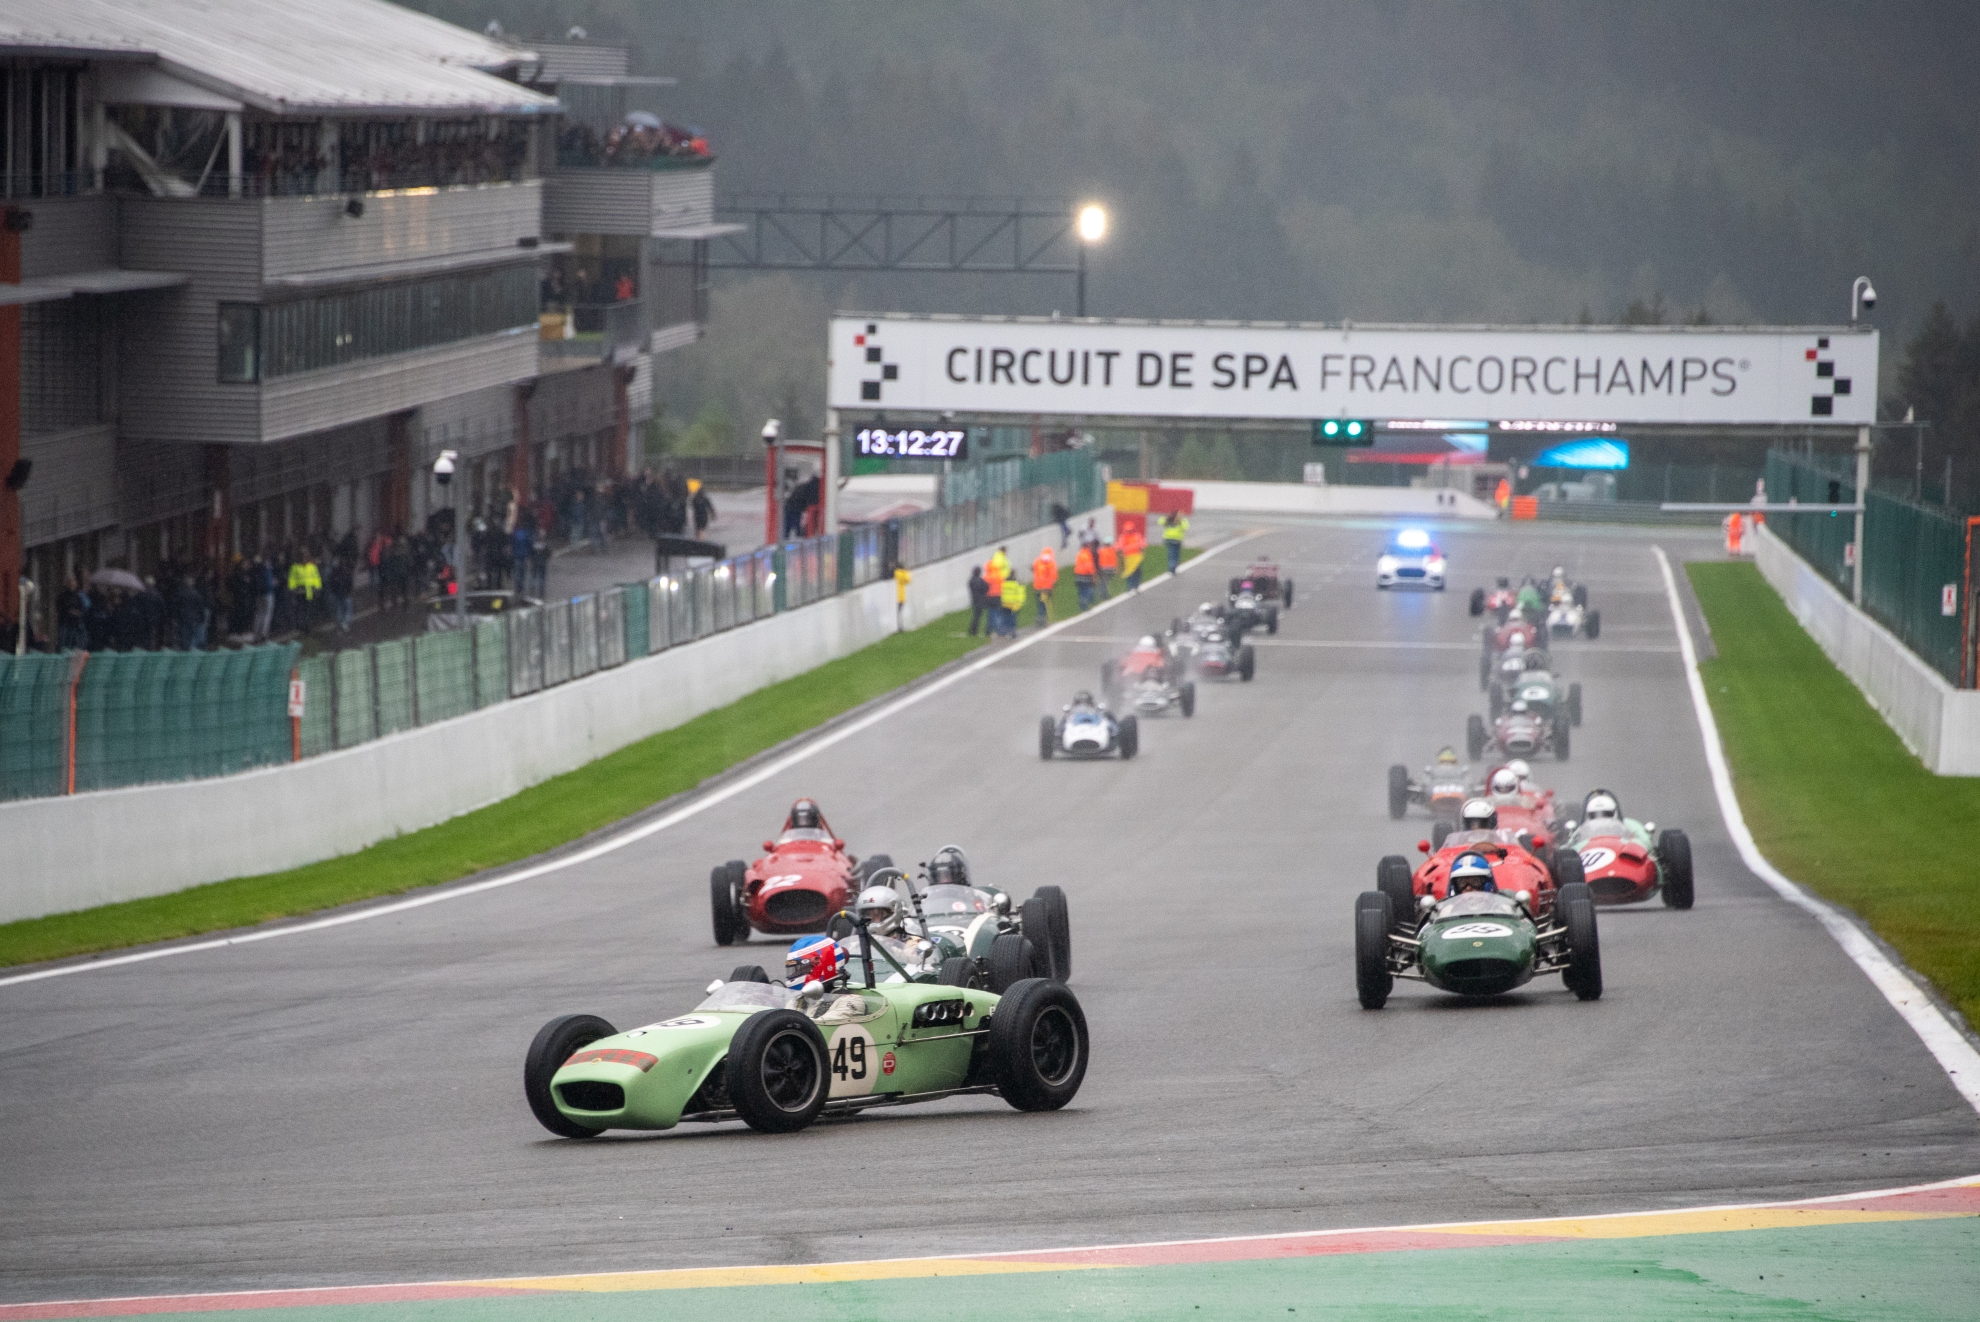 A Good Weekend of racing at Spa!